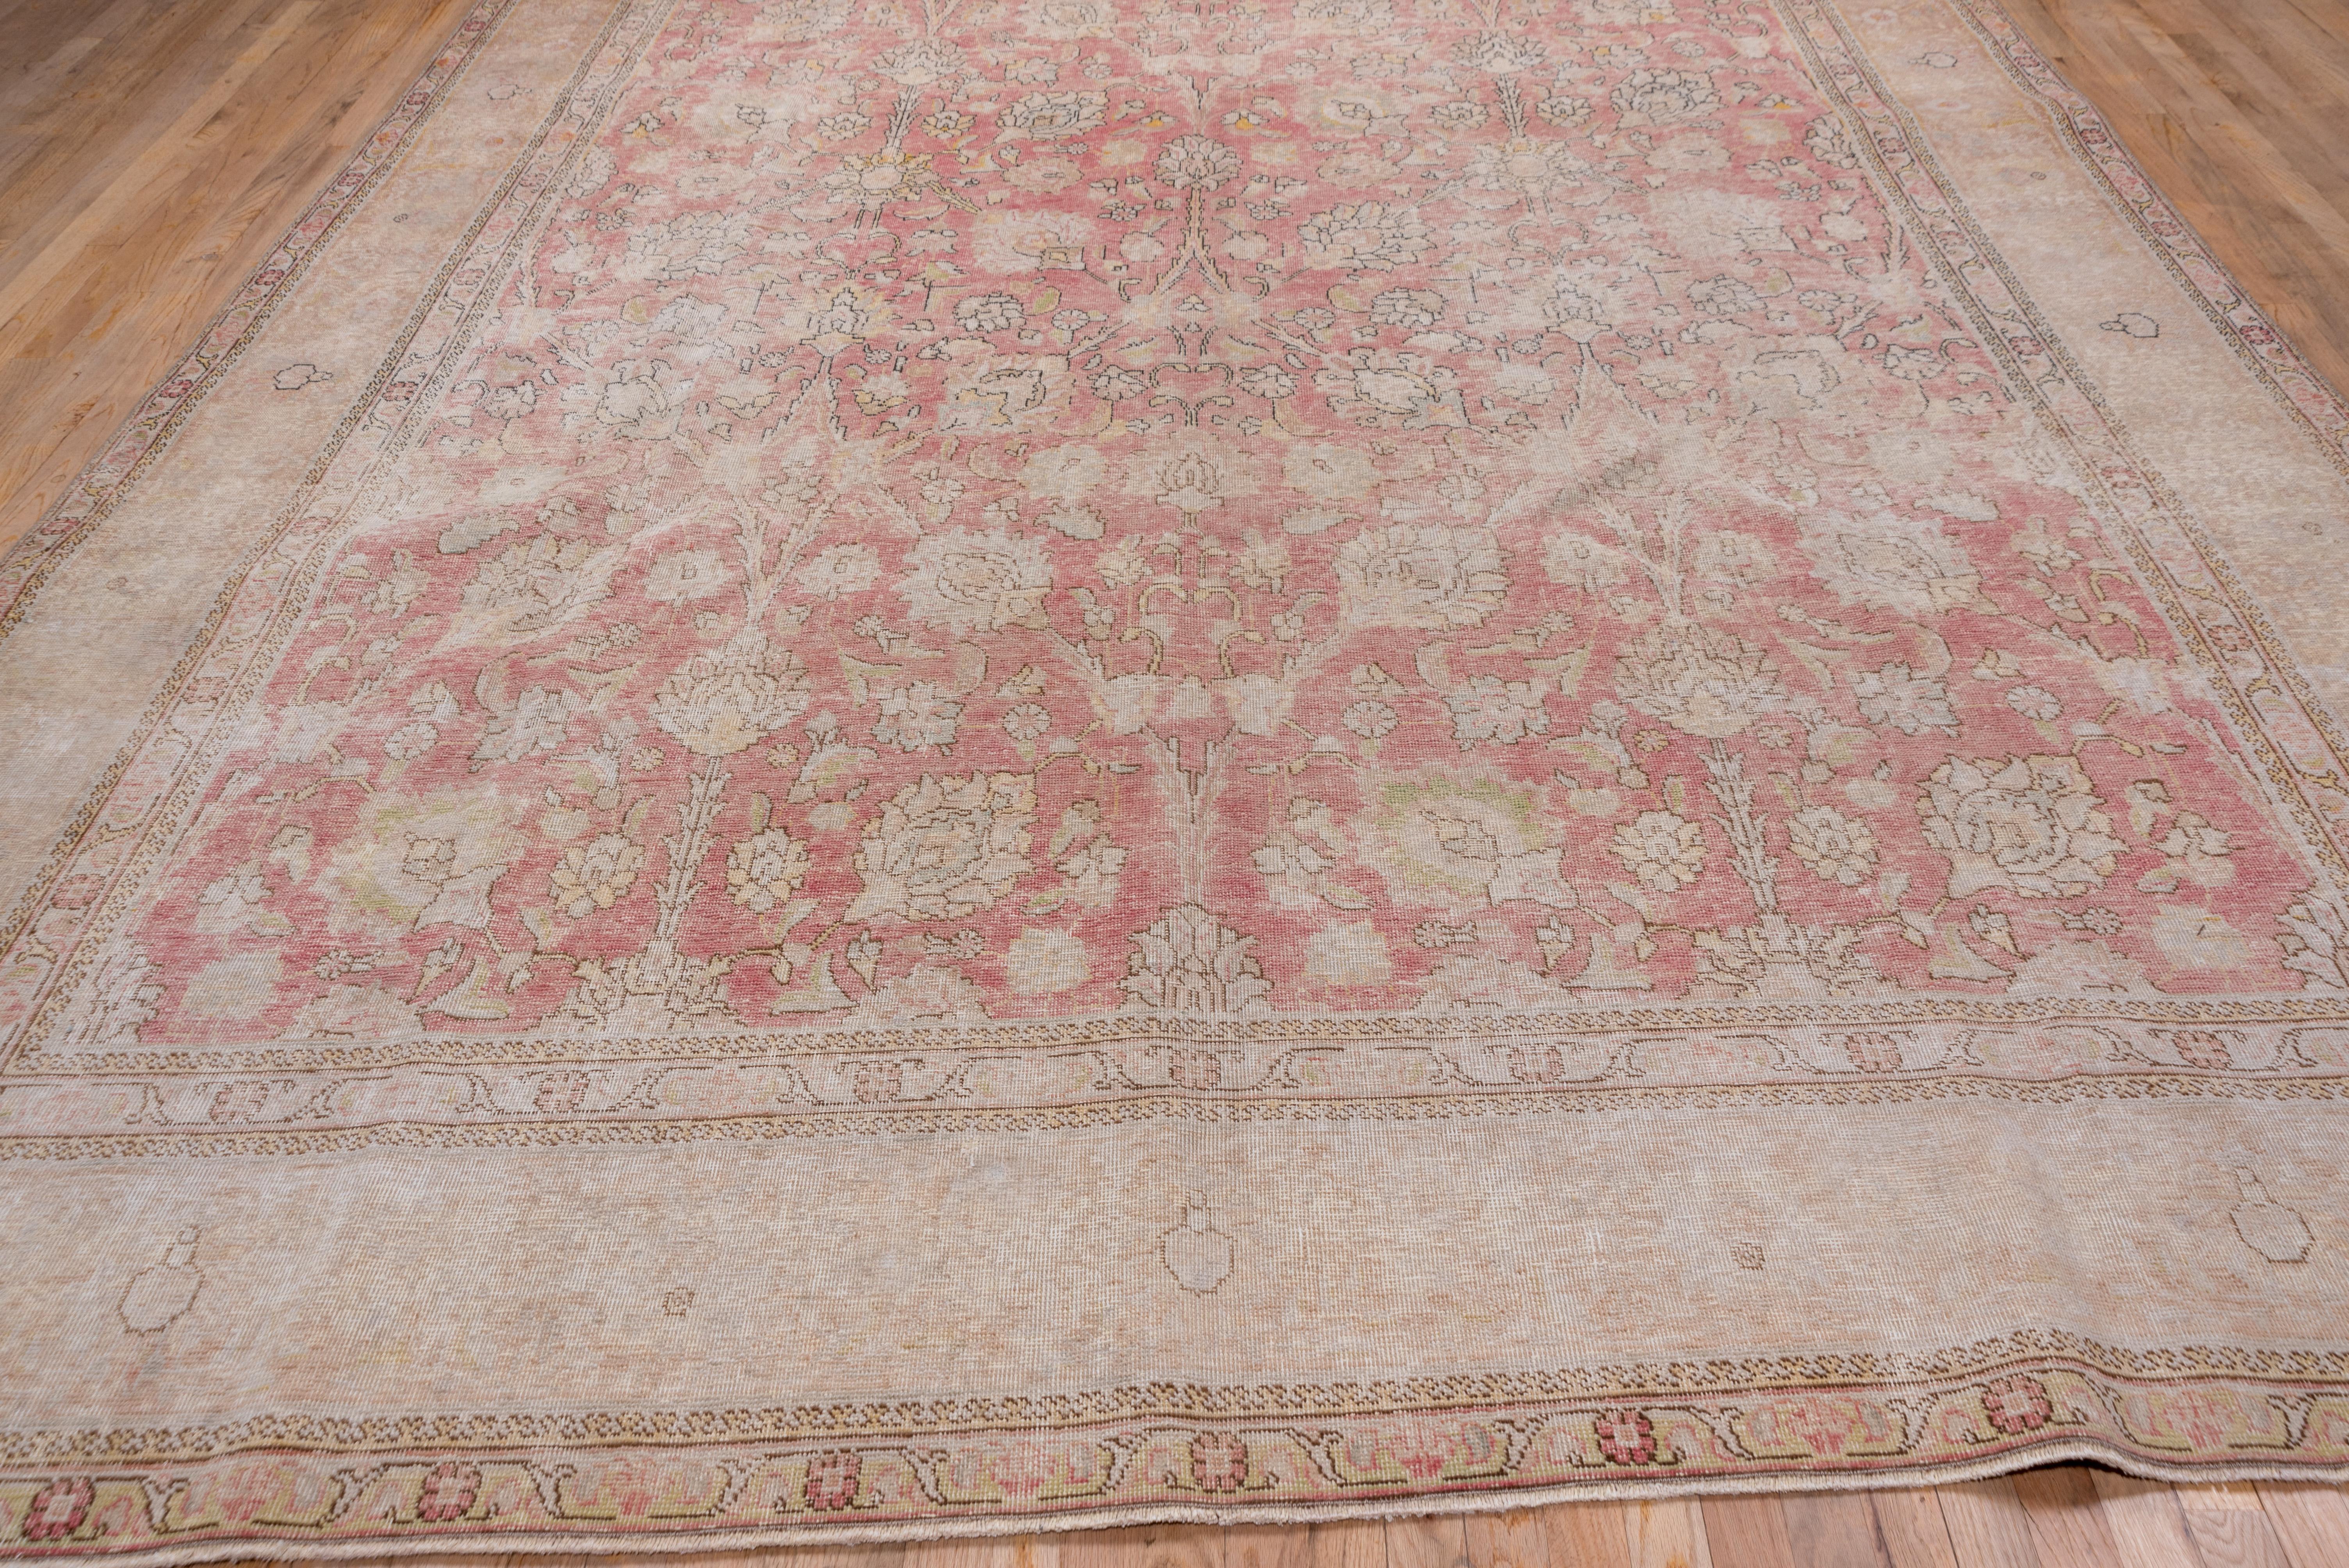 Persian Tabriz rugs are a type of hand-woven carpet that originated in the city of Tabriz, located in northwest Iran. Tabriz is renowned for its long-standing tradition of carpet weaving, and Tabriz rugs are considered to be among the finest and